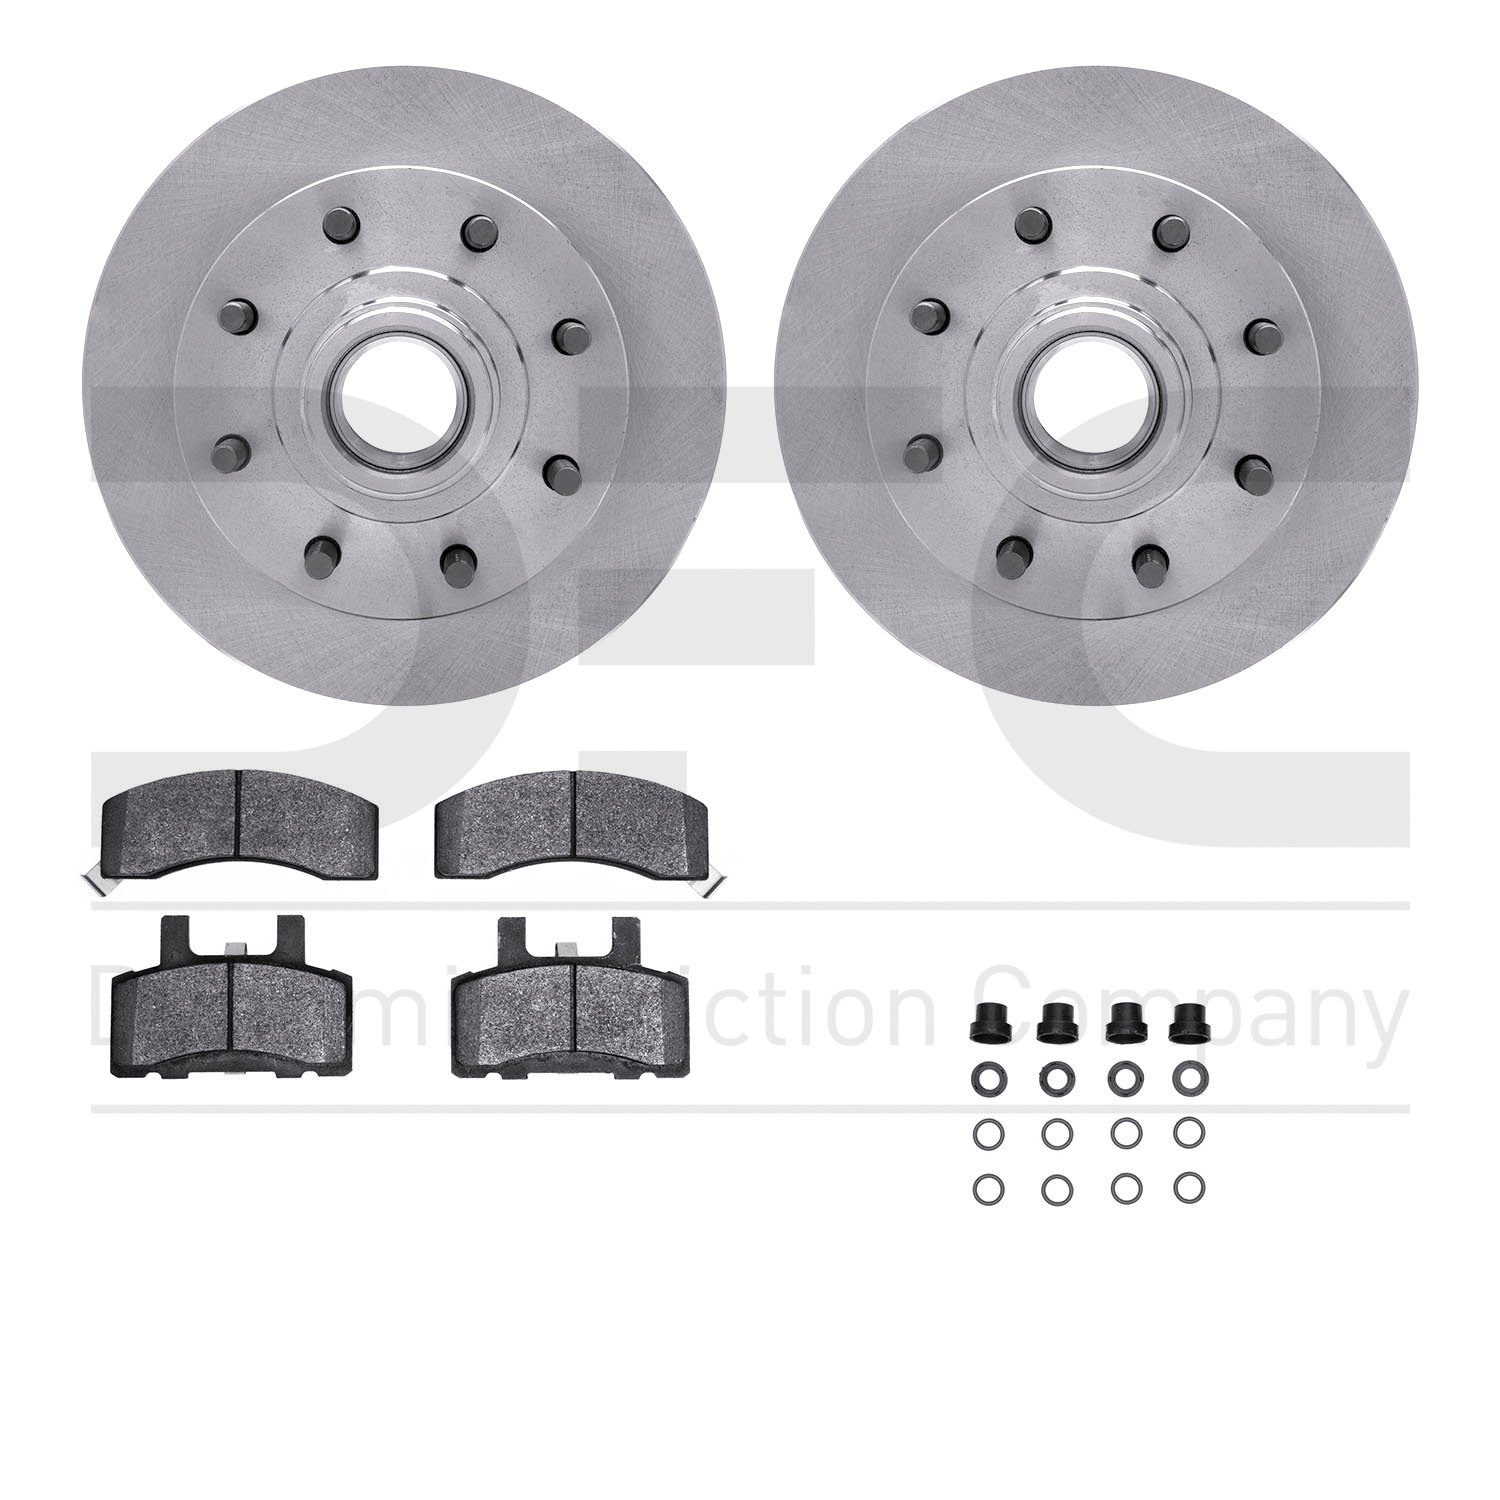 6412-48040 Brake Rotors with Ultimate-Duty Brake Pads Kit & Hardware, 1992-2002 GM, Position: Front